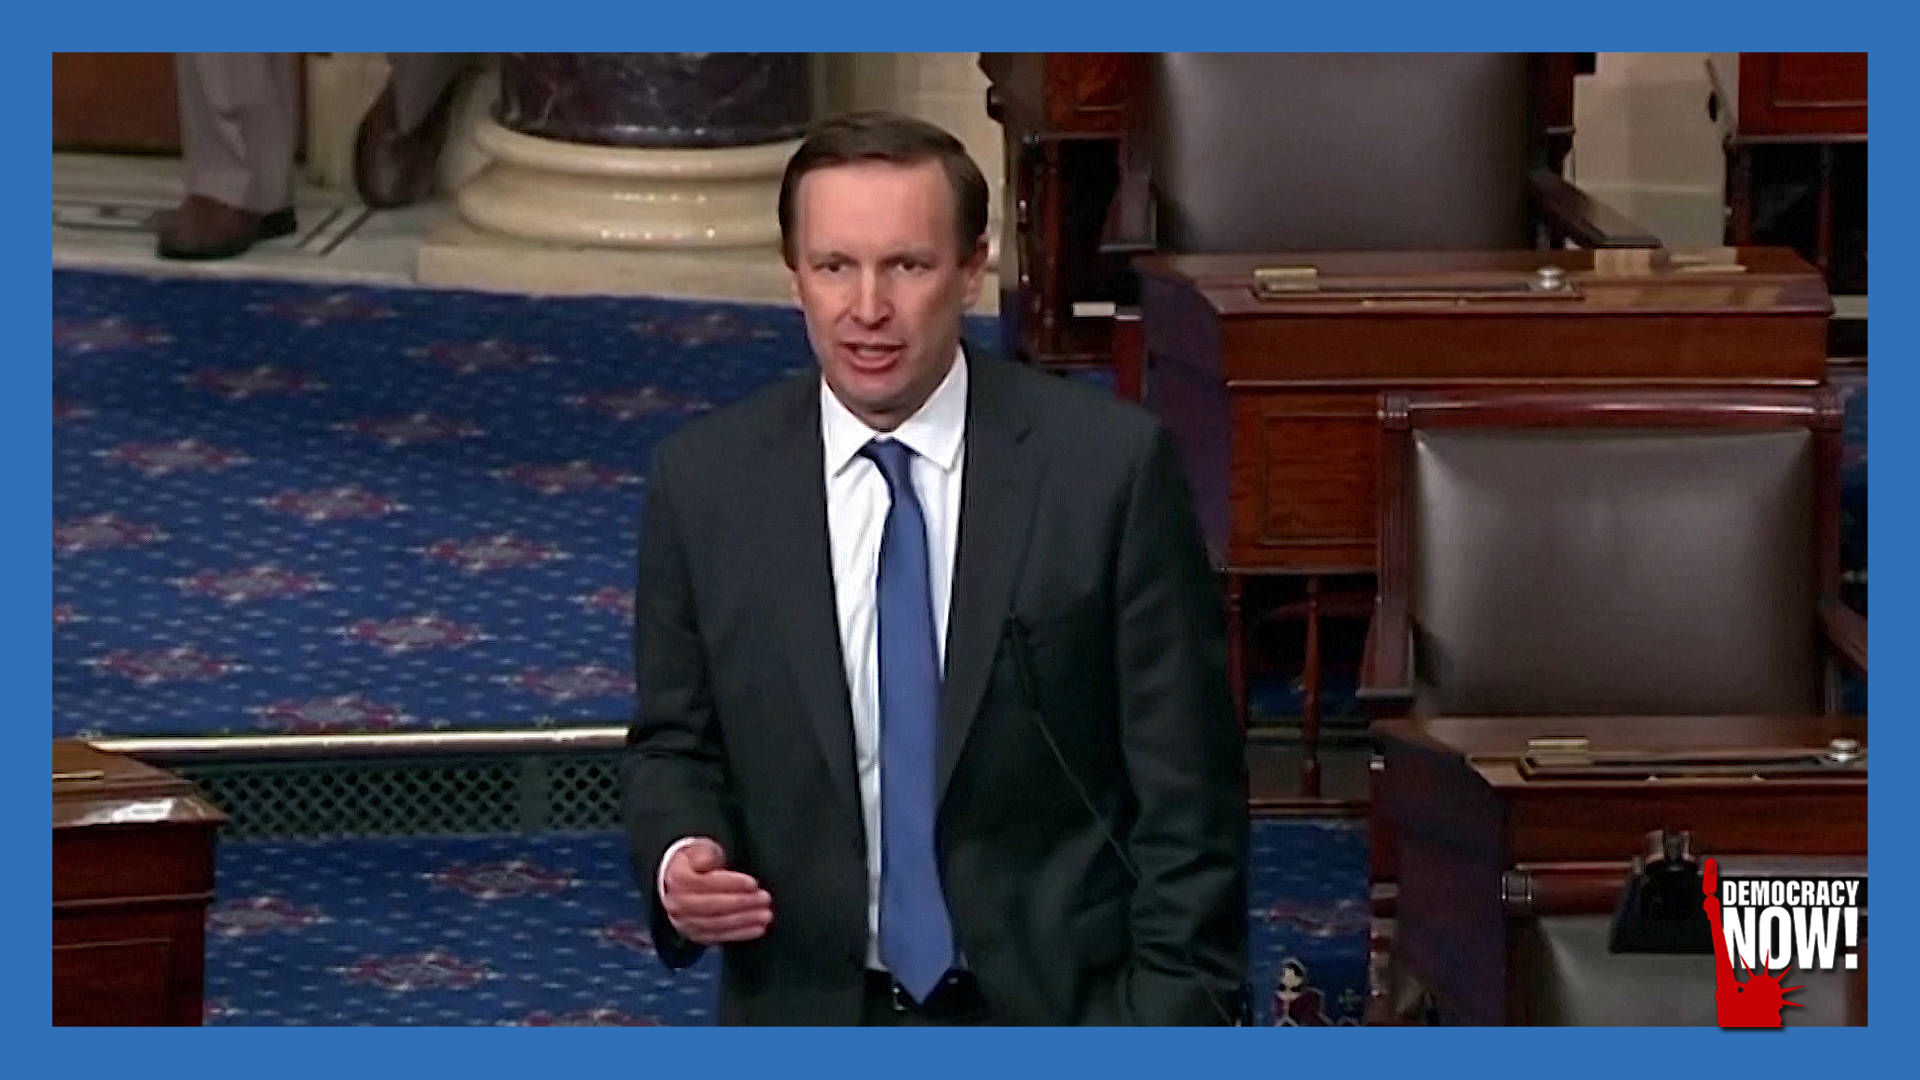 Sen. Chris Murphy, Whose District Includes Sandy Hook, Begs to Pass Gun Control Laws: “What Are We Doing?”